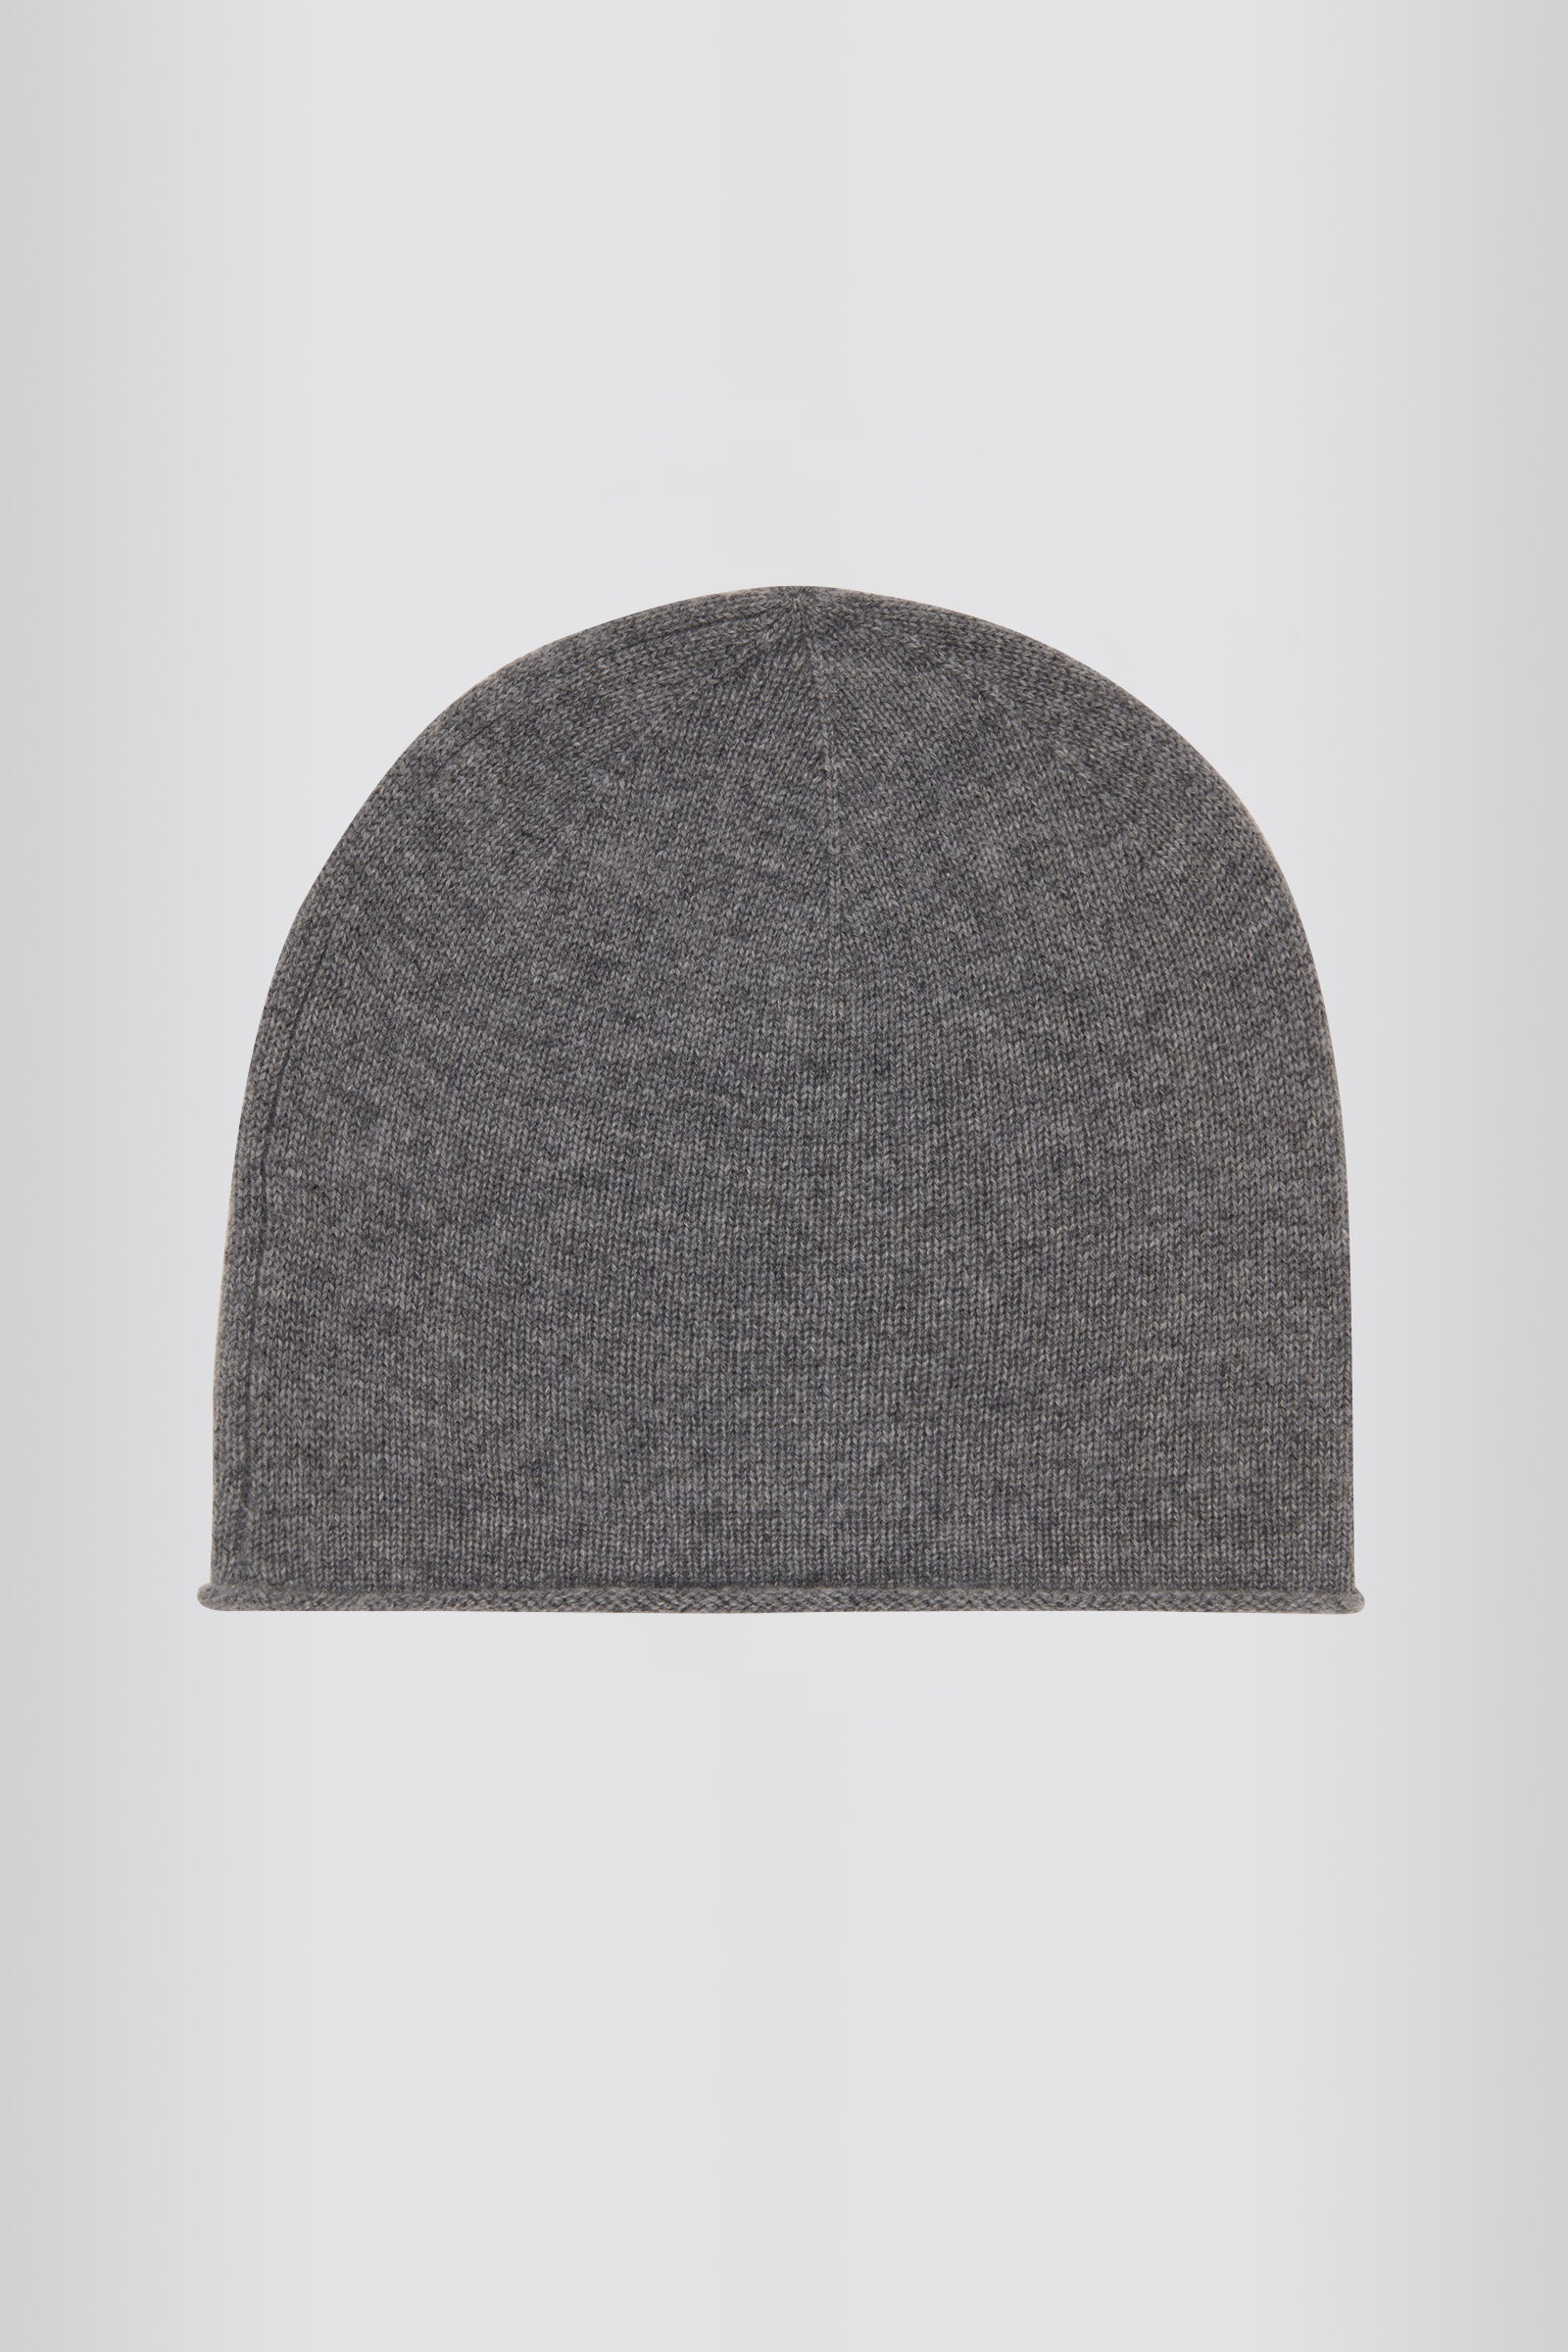 Kal Rieman Cashmere Cap in Flannel Grey on Model Front Side  View